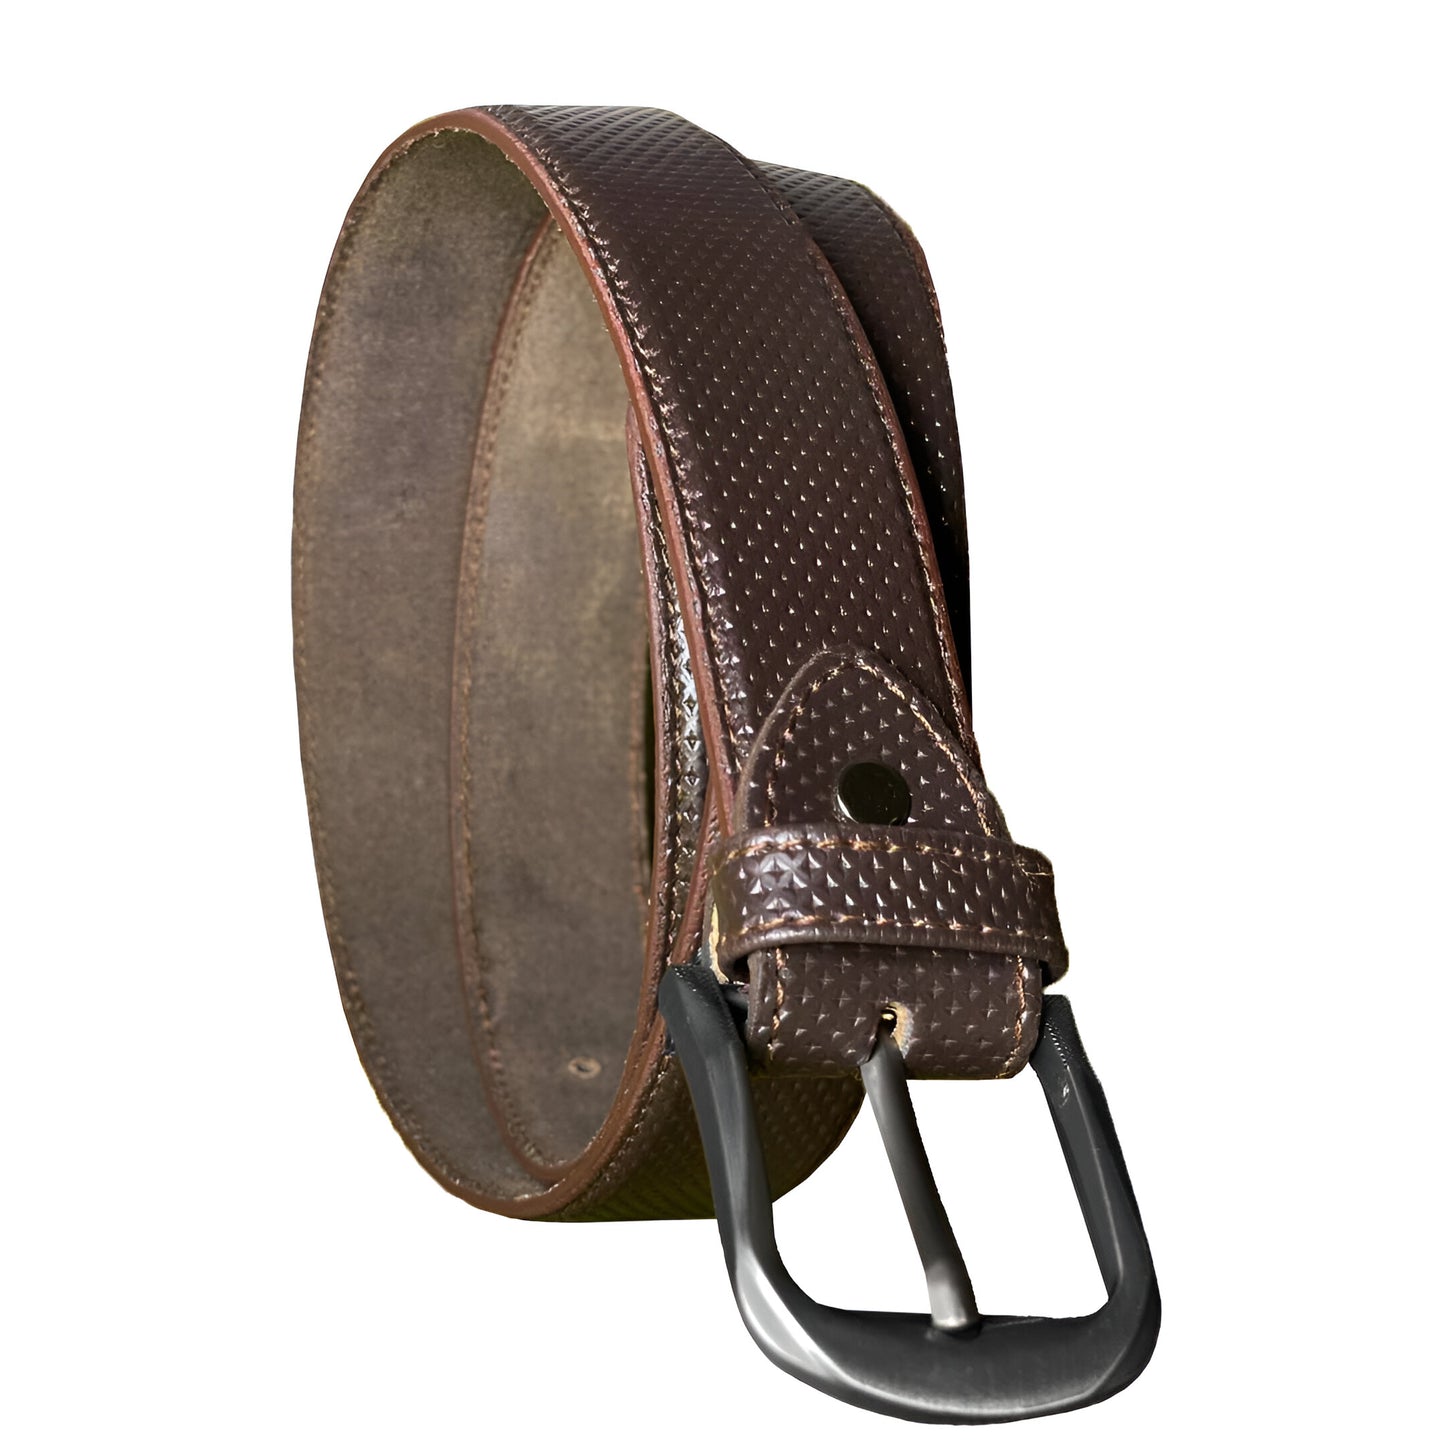 BROWN DOTTED BELT